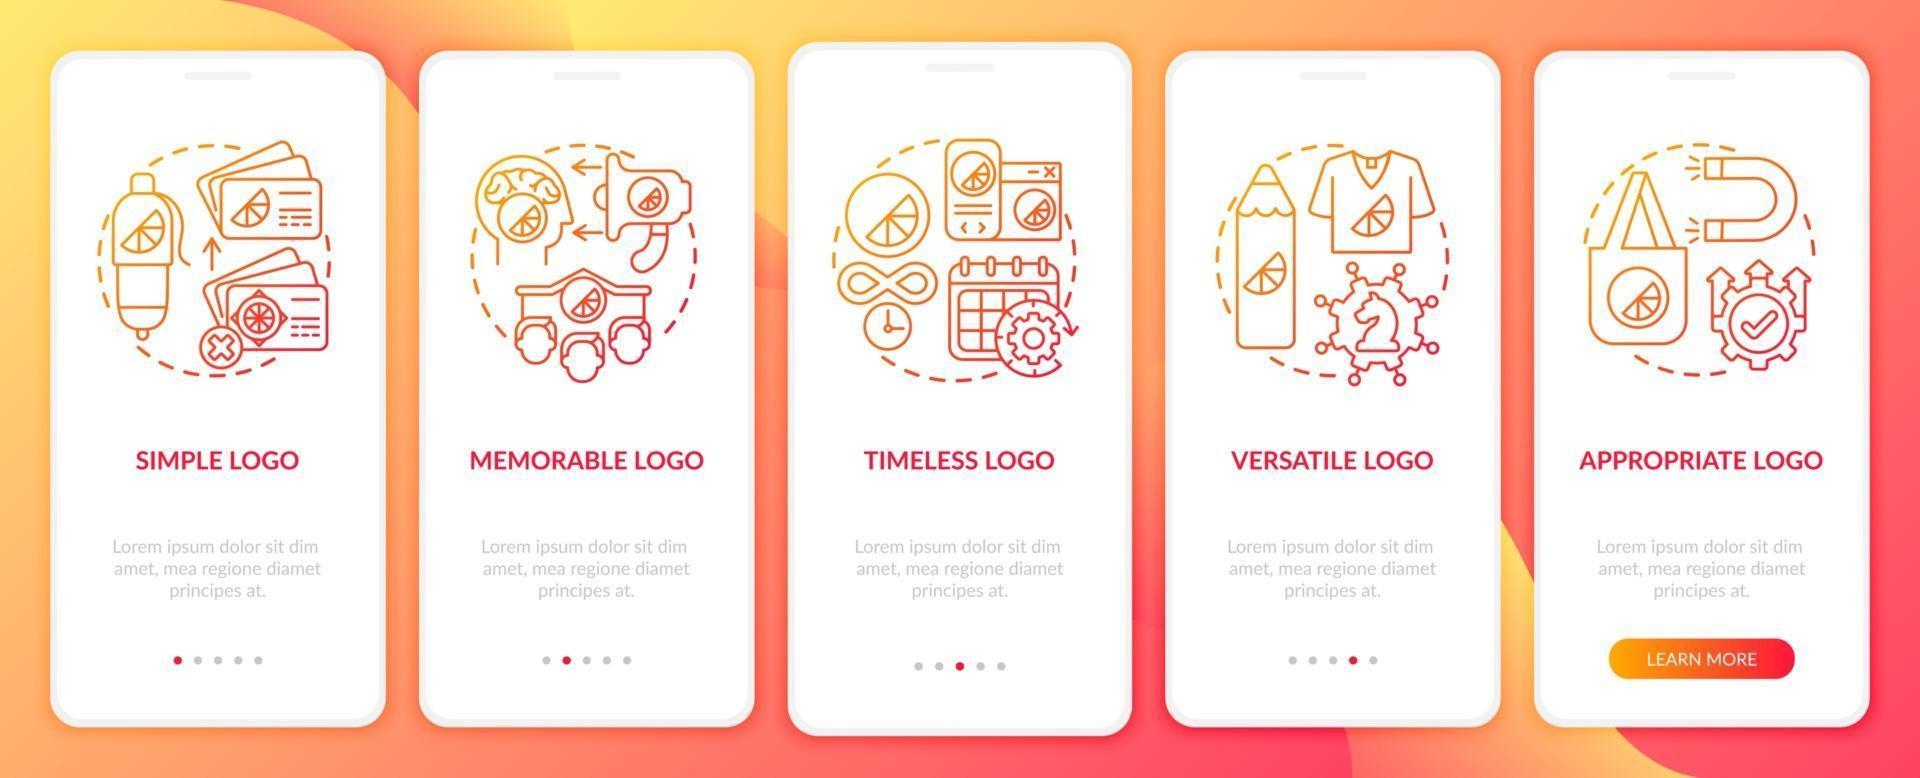 Effective logo design onboarding mobile app page screen with concepts. Simple, memorable logo walkthrough 5 steps graphic instructions. UI, UX, GUI vector template with linear color illustrations